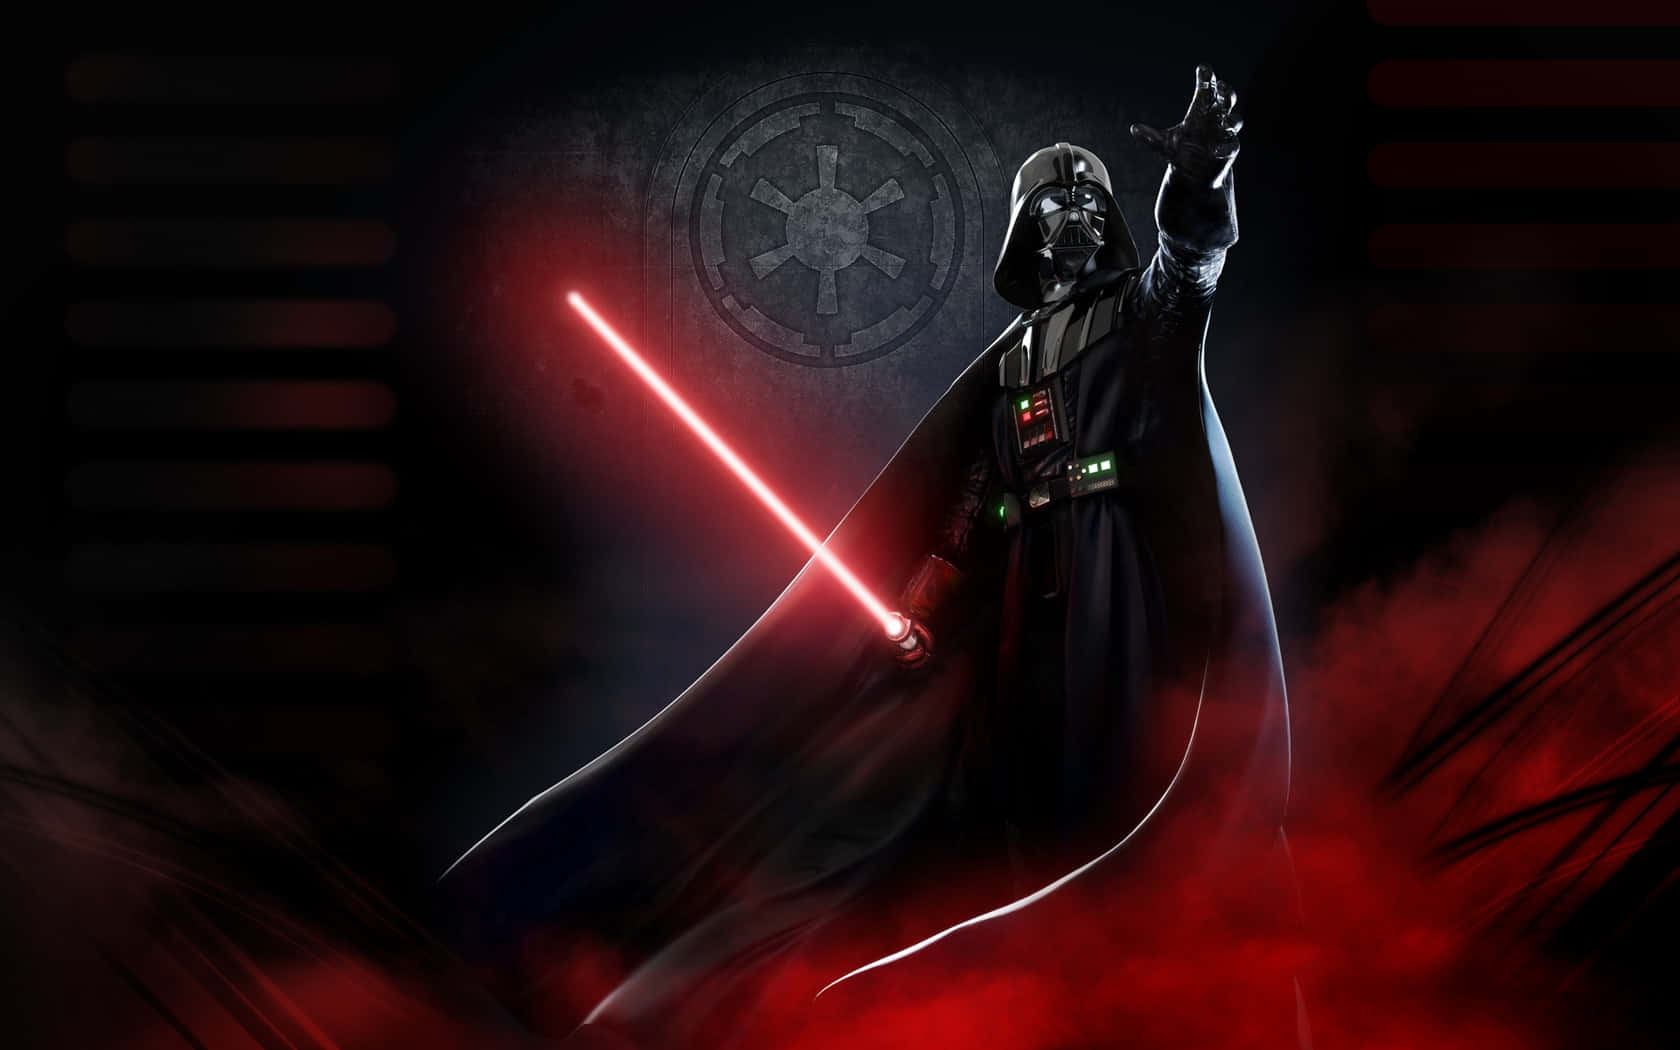 Darth Vader, the Legendary Dark Lord of the Sith